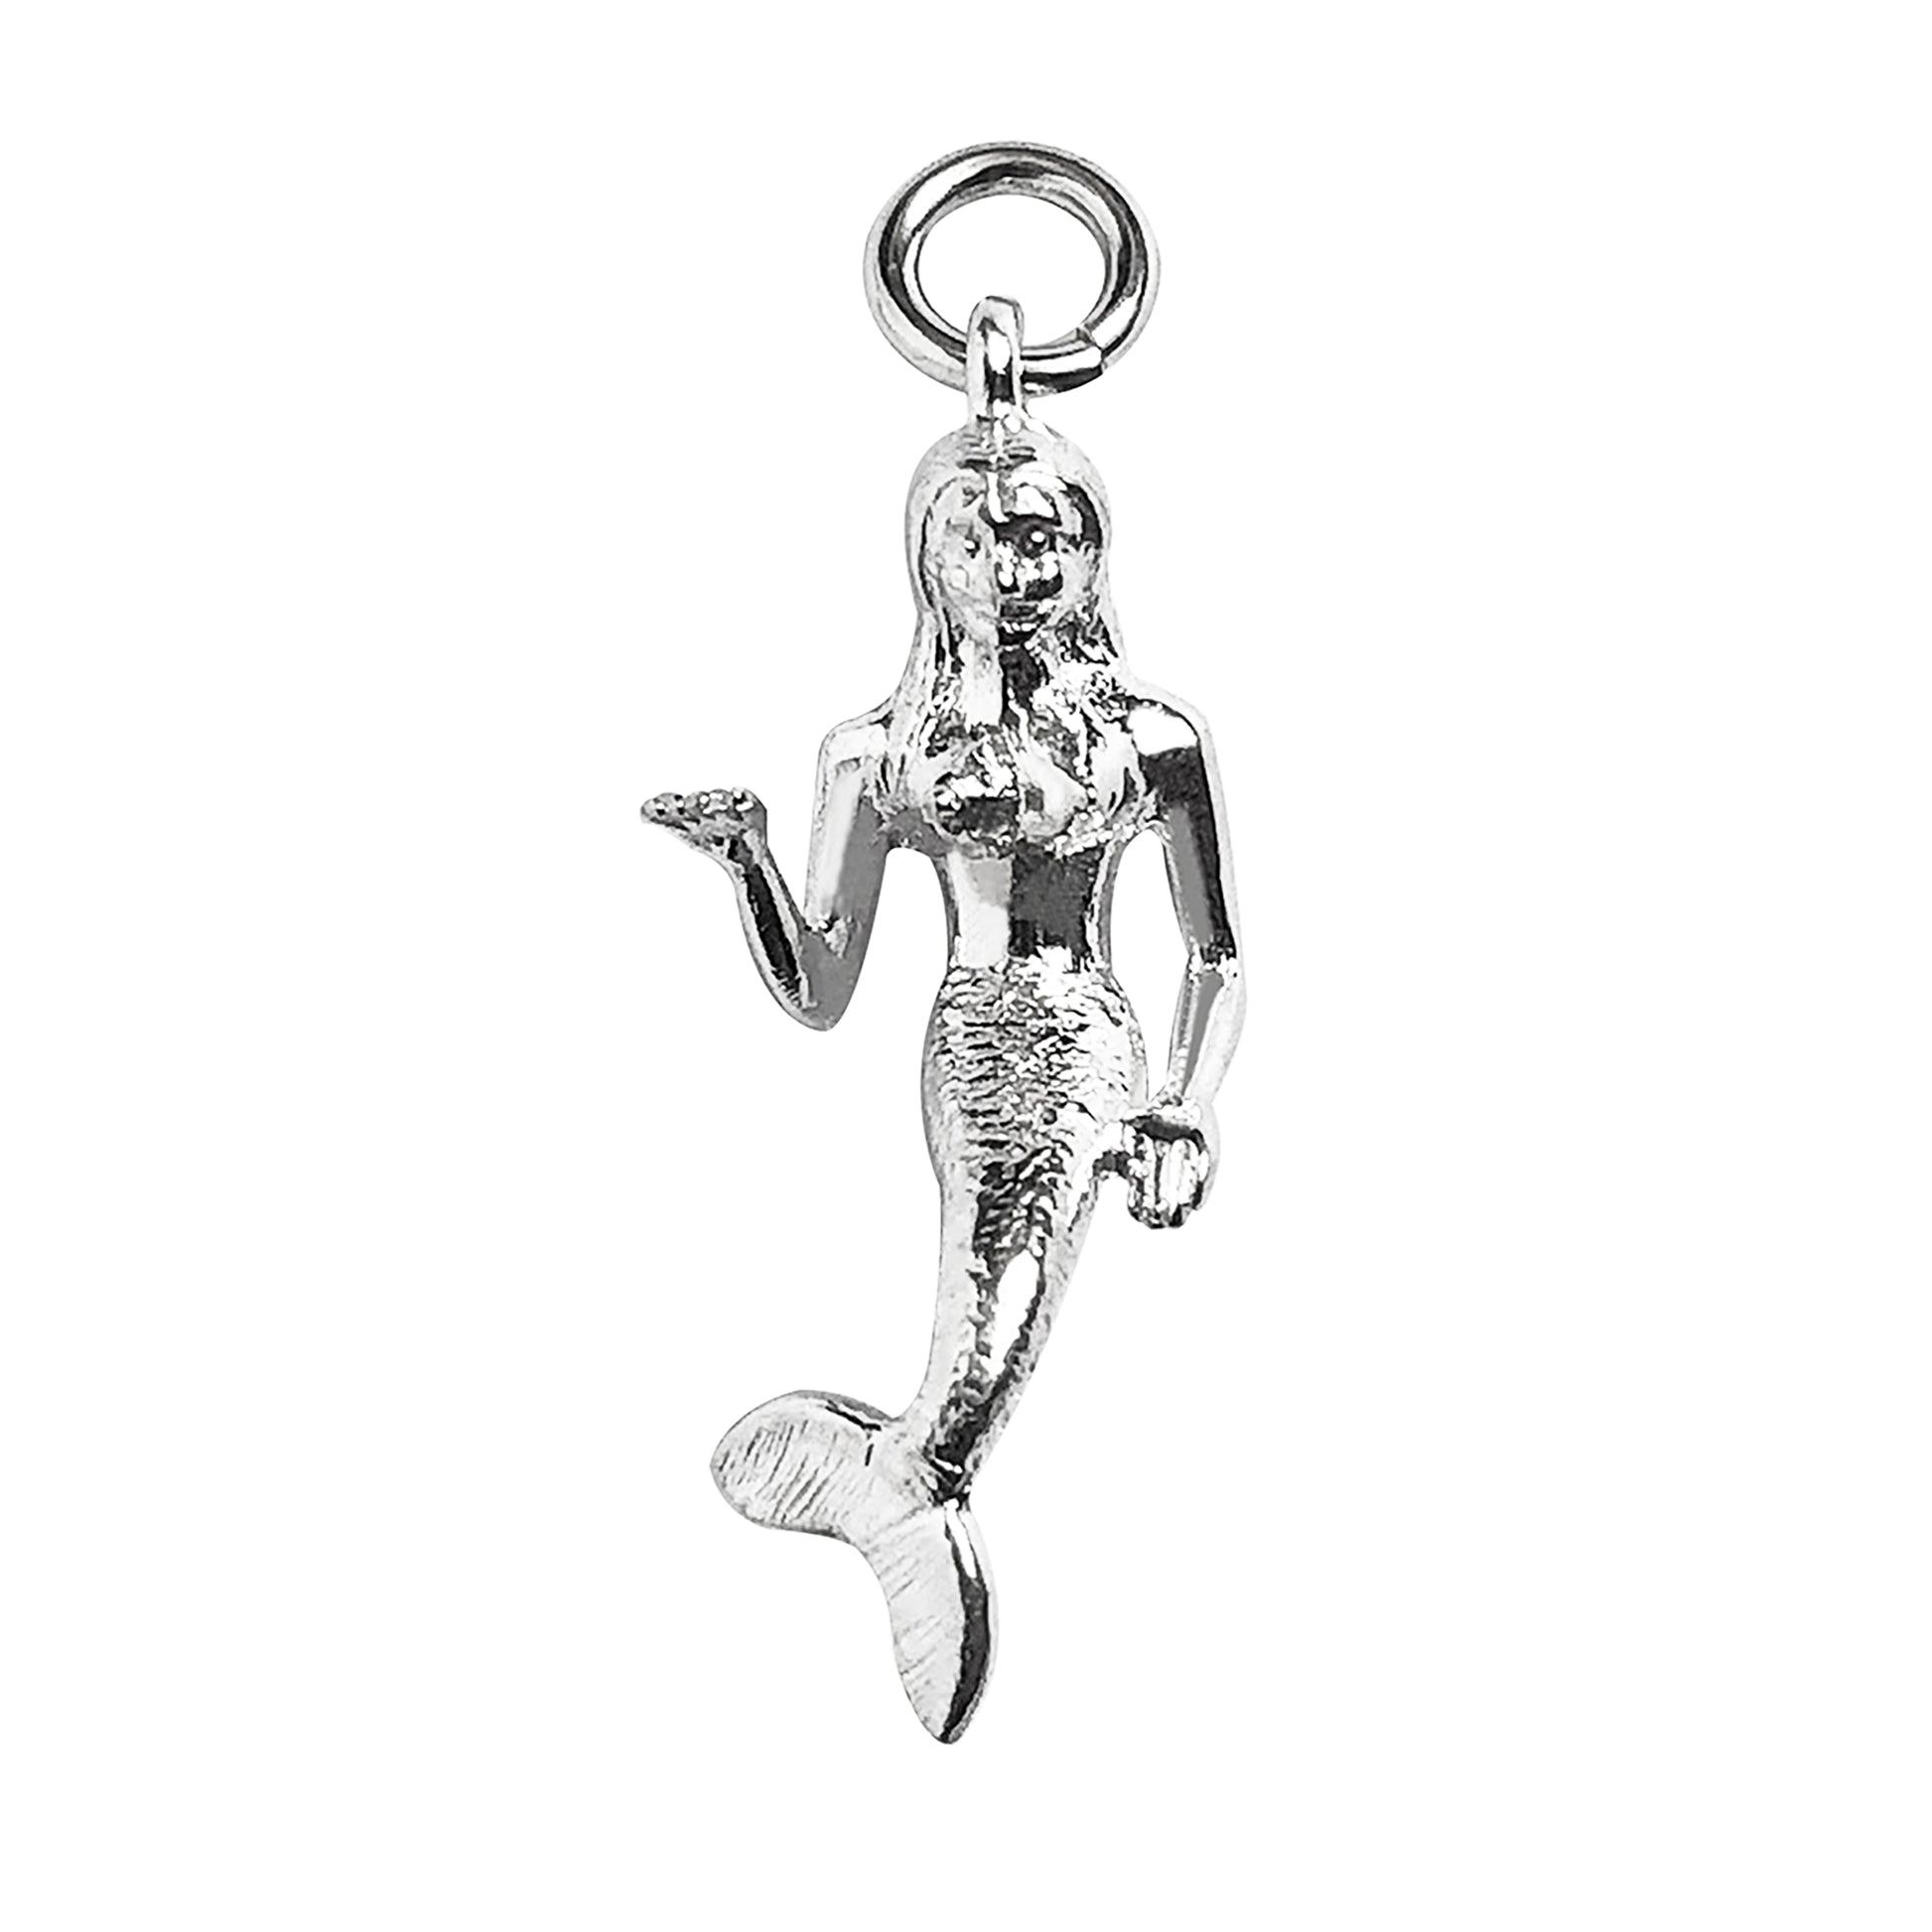 Mermaid Charm Sterling Silver or Gold Pendant